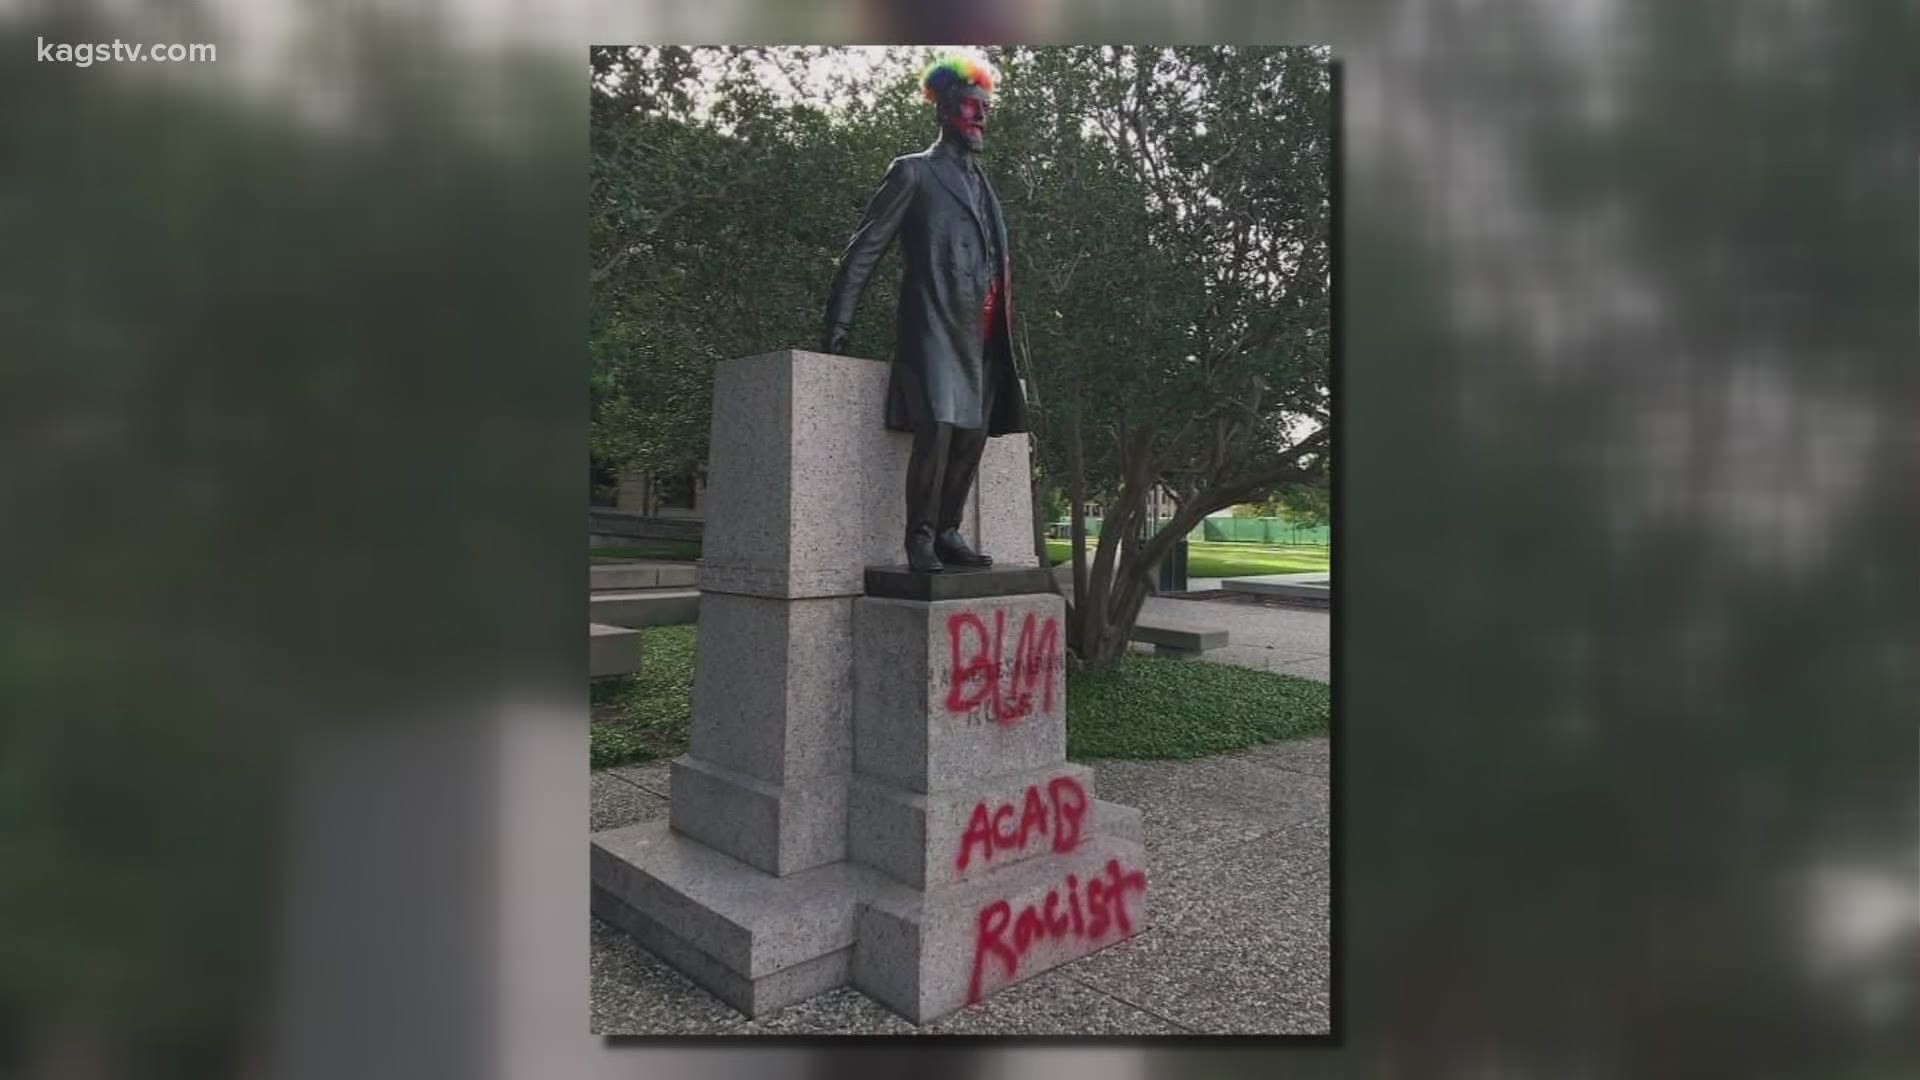 TAMU police are investigating after the "Sully" statue was vandalized overnight.